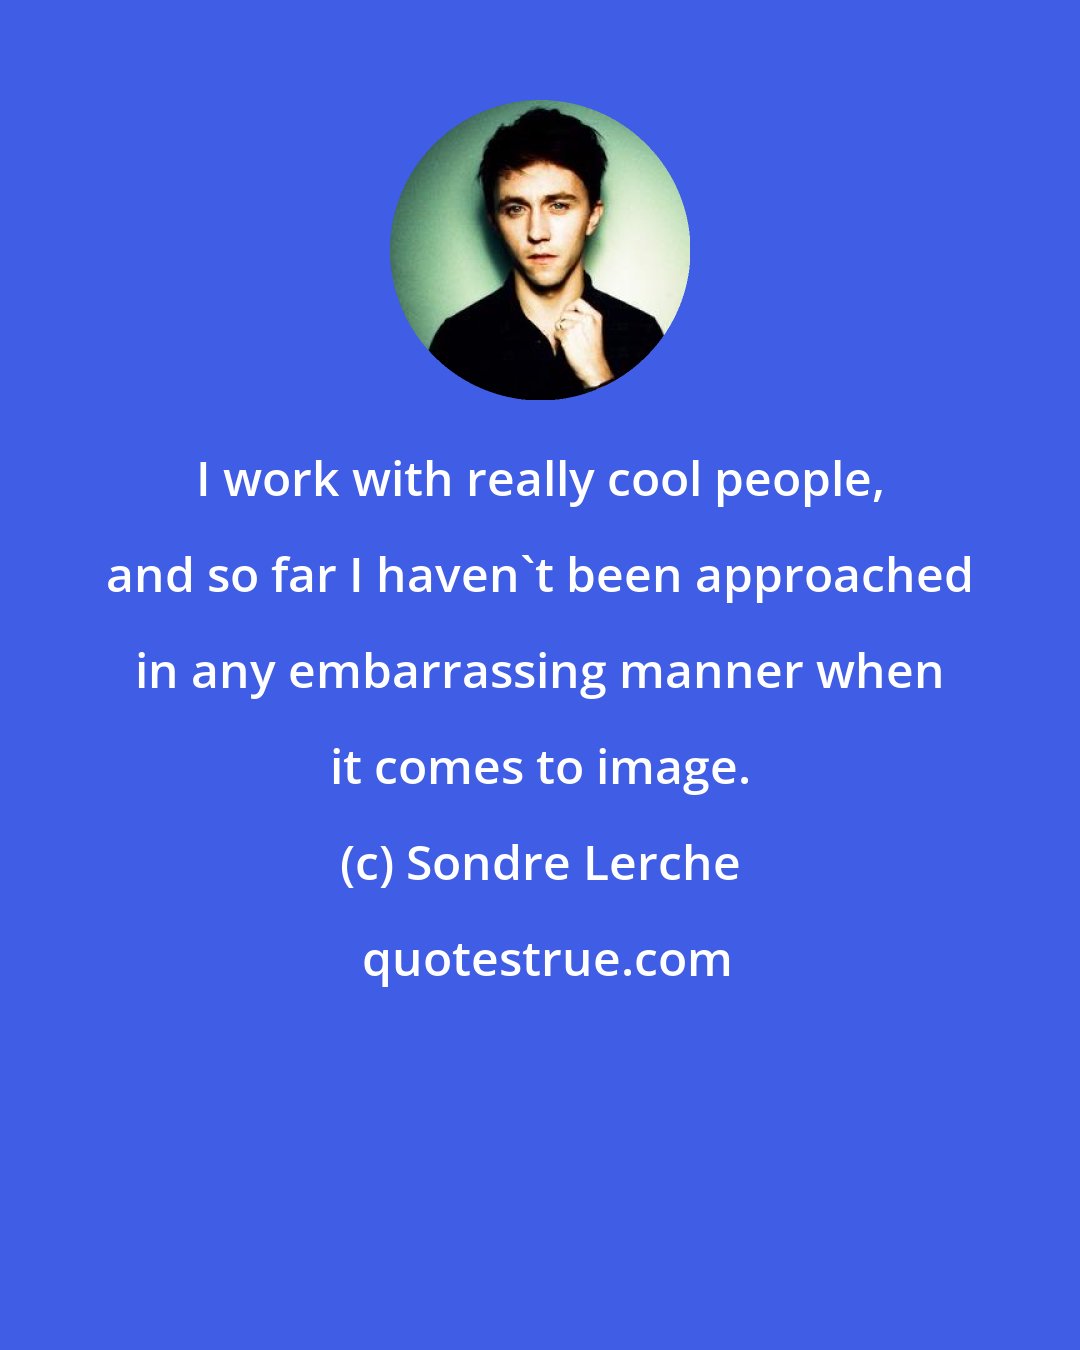 Sondre Lerche: I work with really cool people, and so far I haven't been approached in any embarrassing manner when it comes to image.